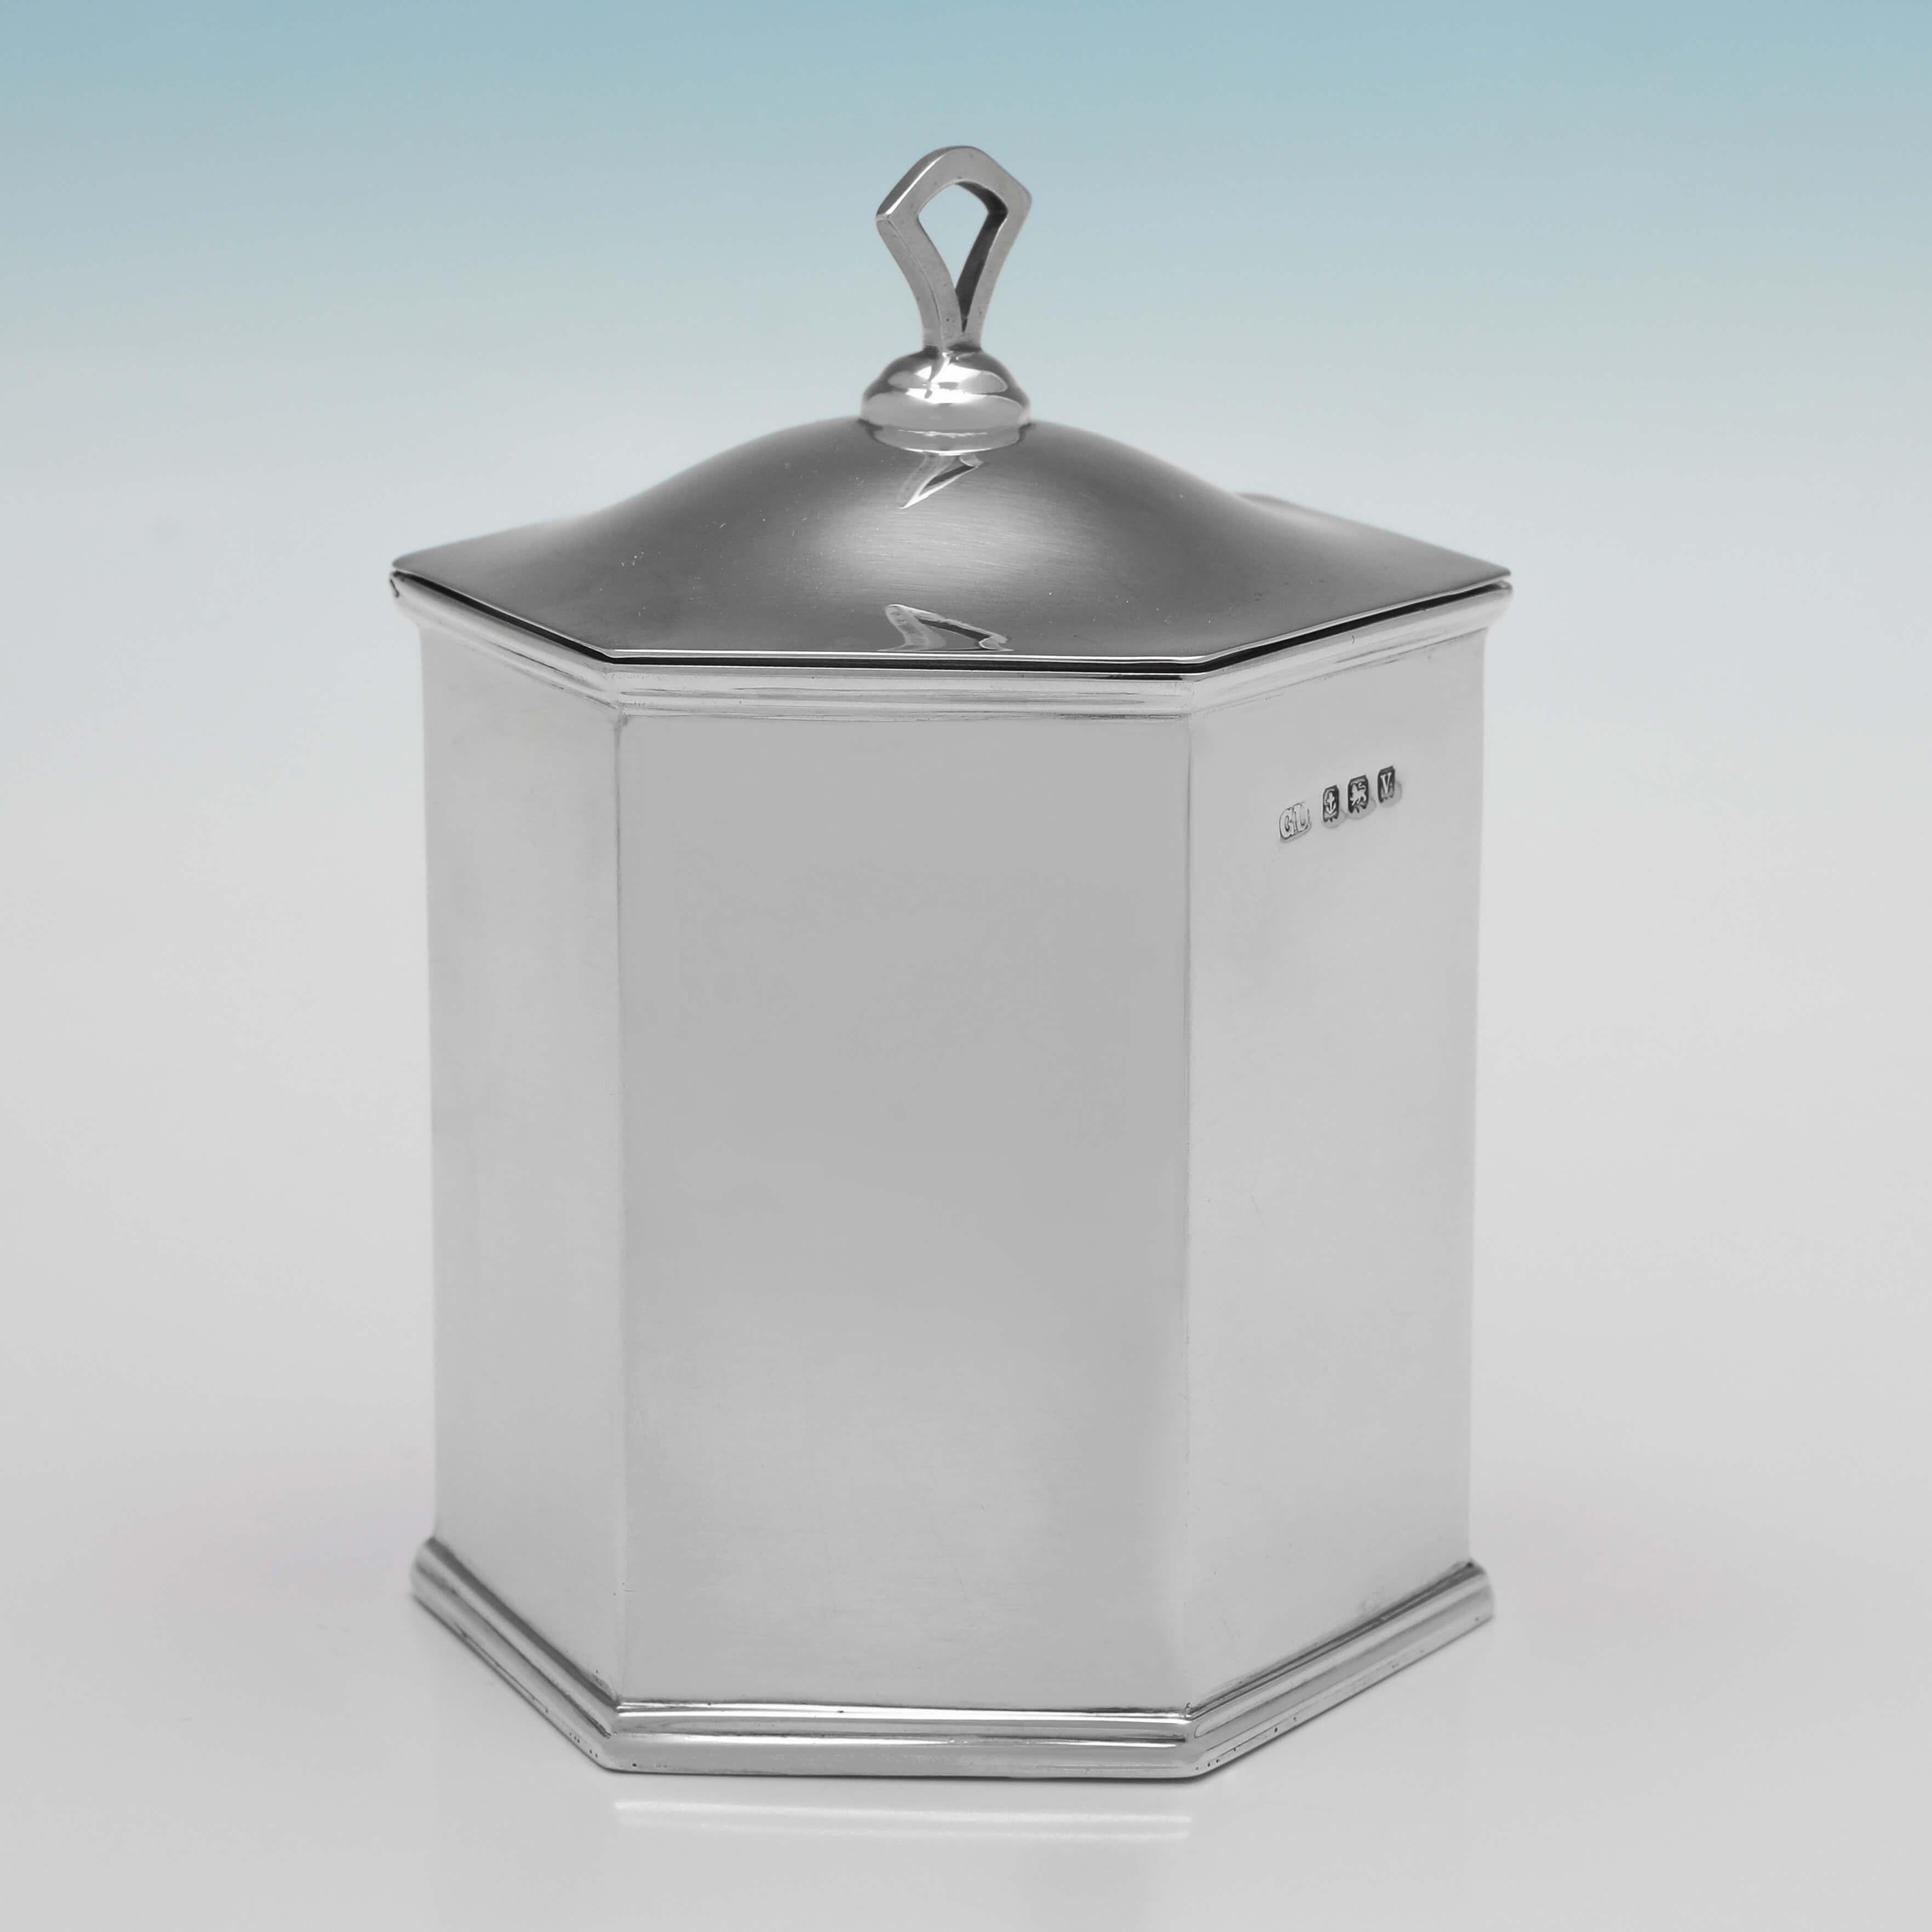 Hallmarked in Birmingham in 1920 by George Unite & Sons, this handsome, Antique Sterling Silver Tea Caddy, is hexagonal in shape, and featured reed borders, and a pull of lid. 

The tea caddy measures 4.5